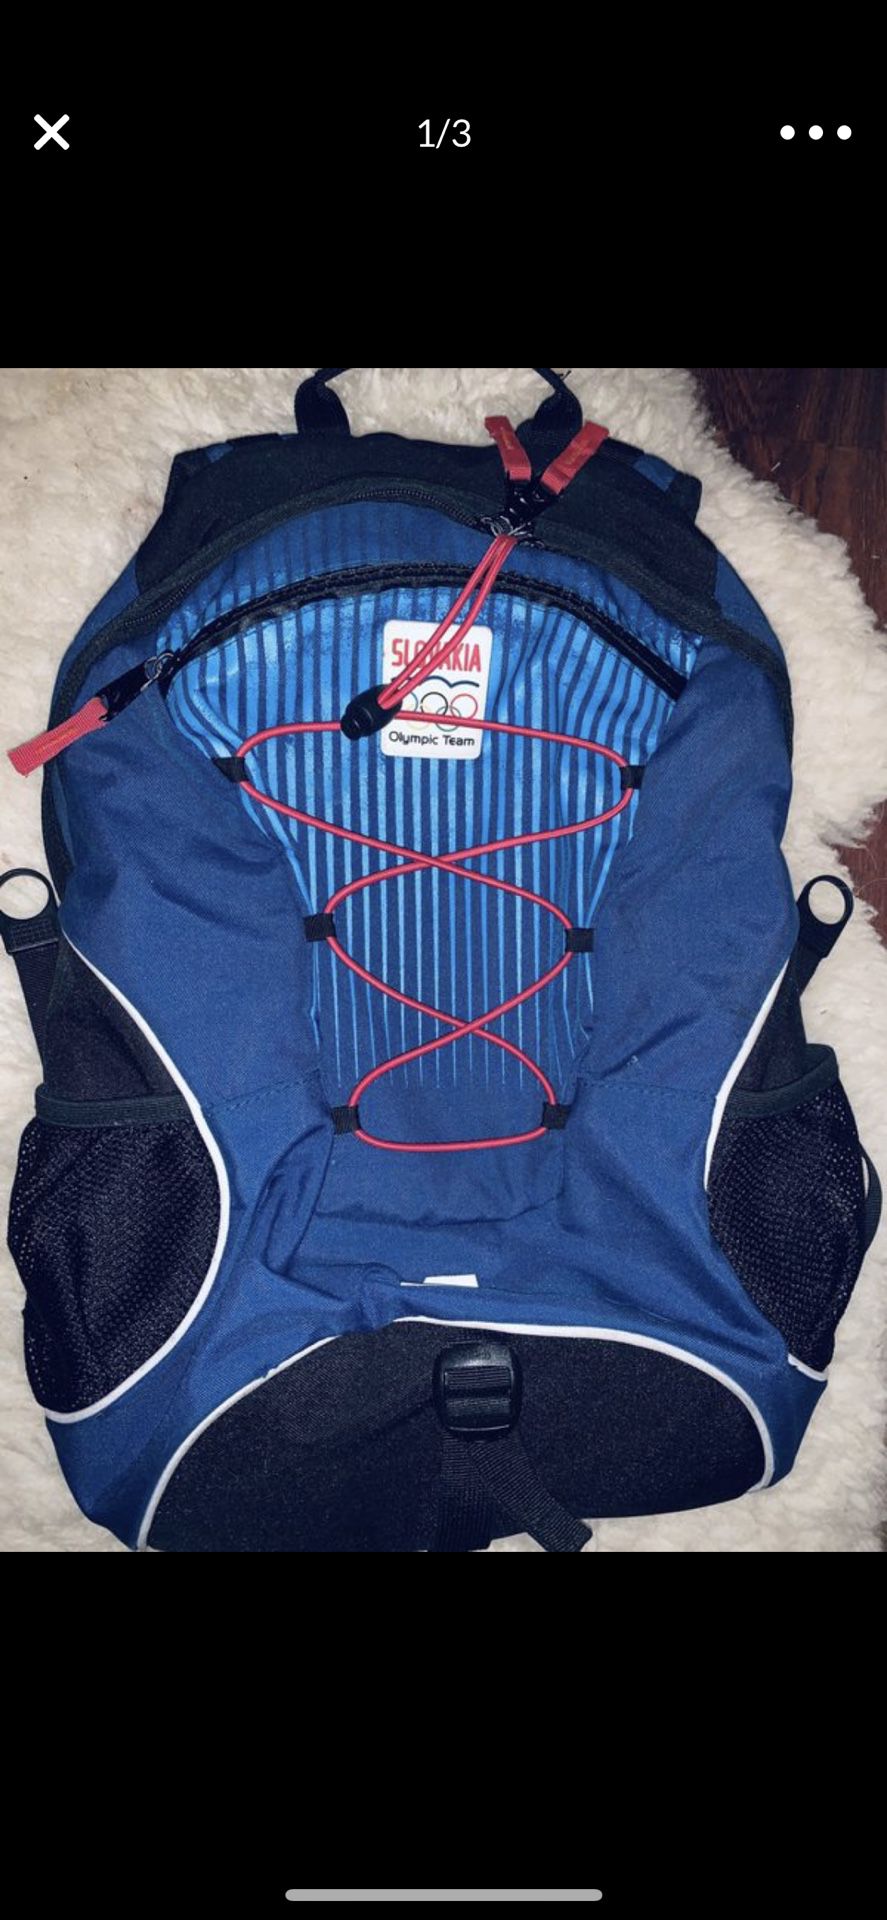 Backpack Original professional athlete backup Olympic from Rio brazil( Not free 20$ OrBestOffer )